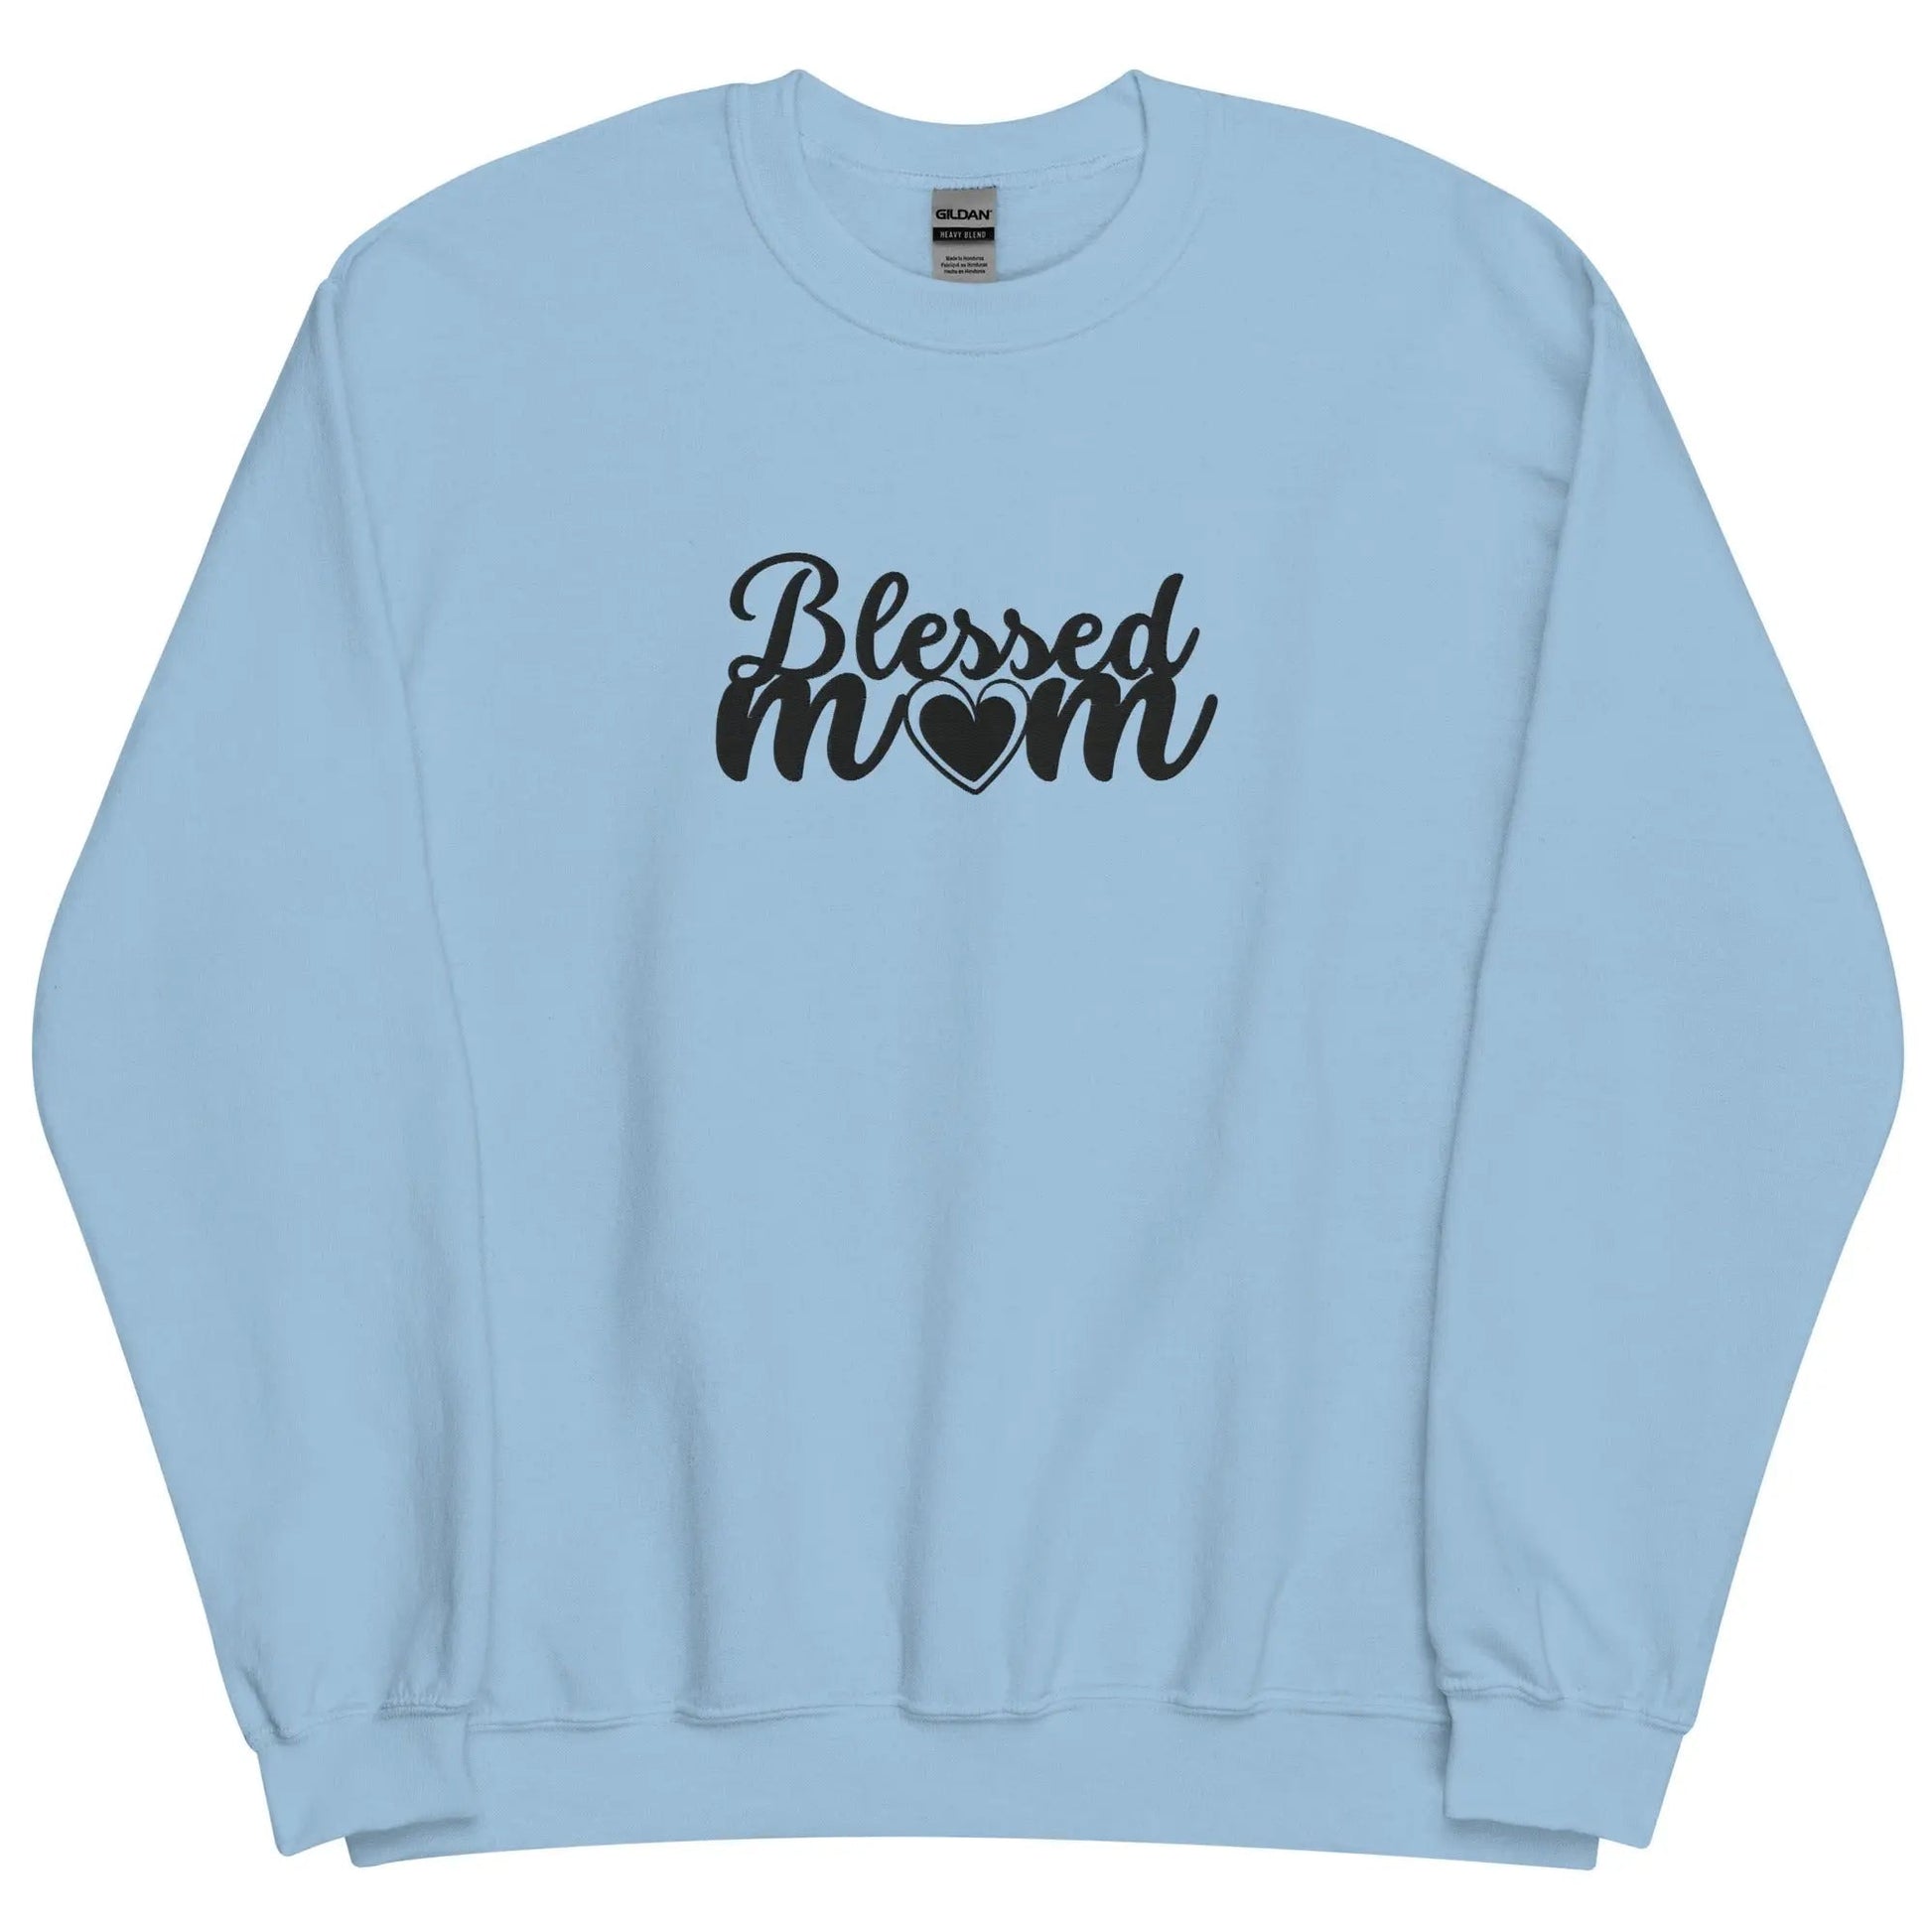 Embroidered Blessed Mom Embroidery Crewneck Sweatshirt-clothes- sweater-Light Blue-S-mysticalcherry